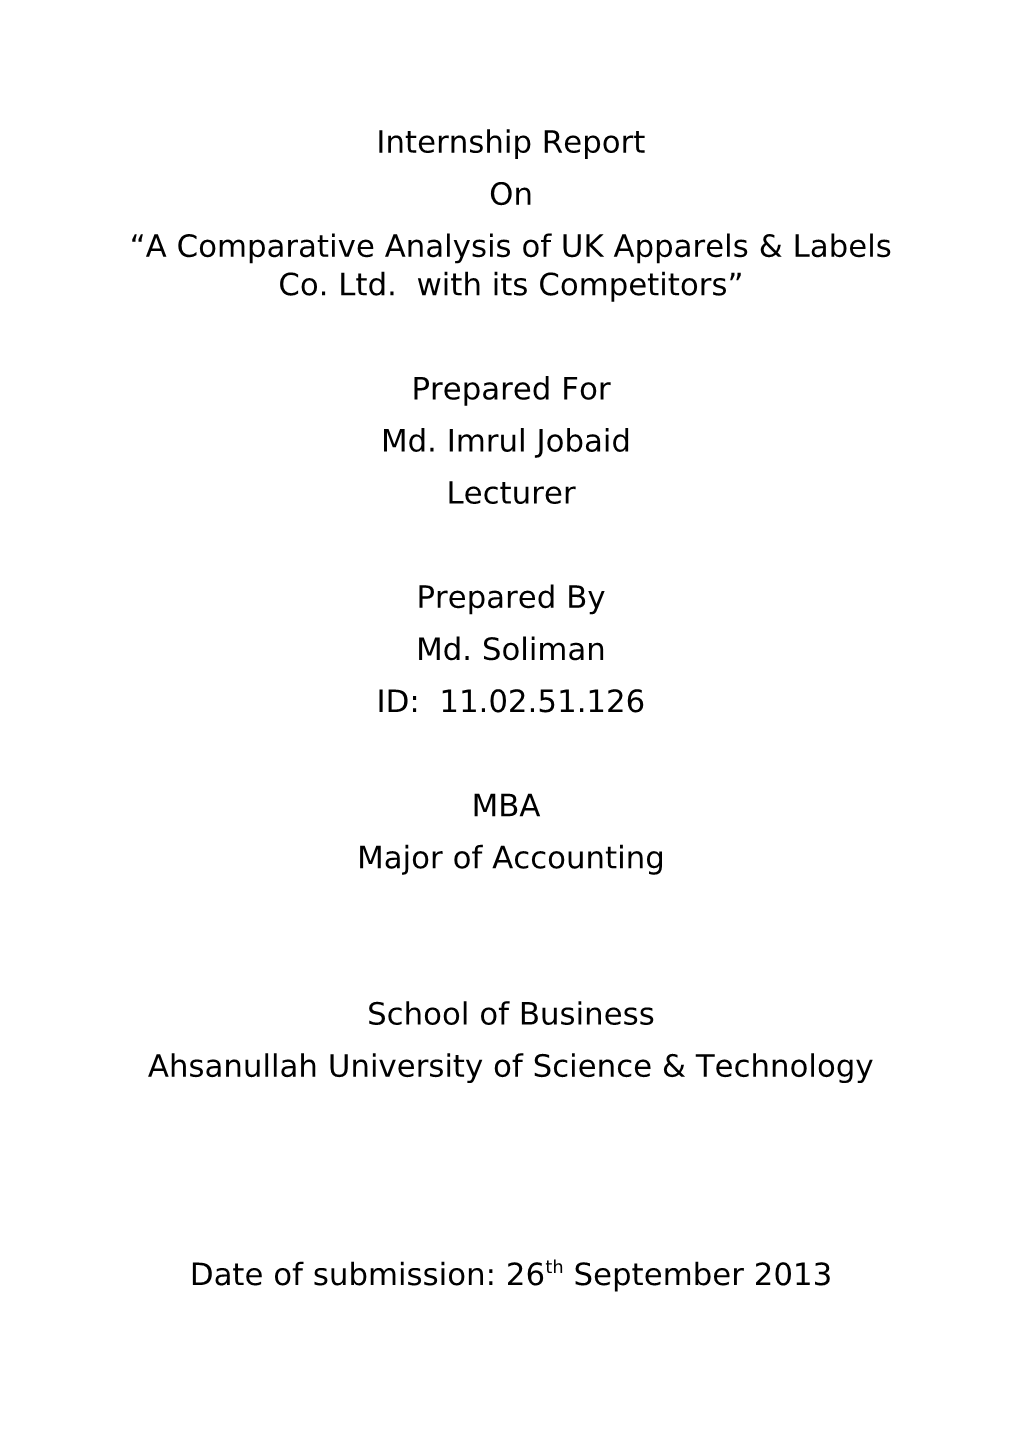 A Comparative Analysis of UK Apparels & Labels Co. Ltd. with Its